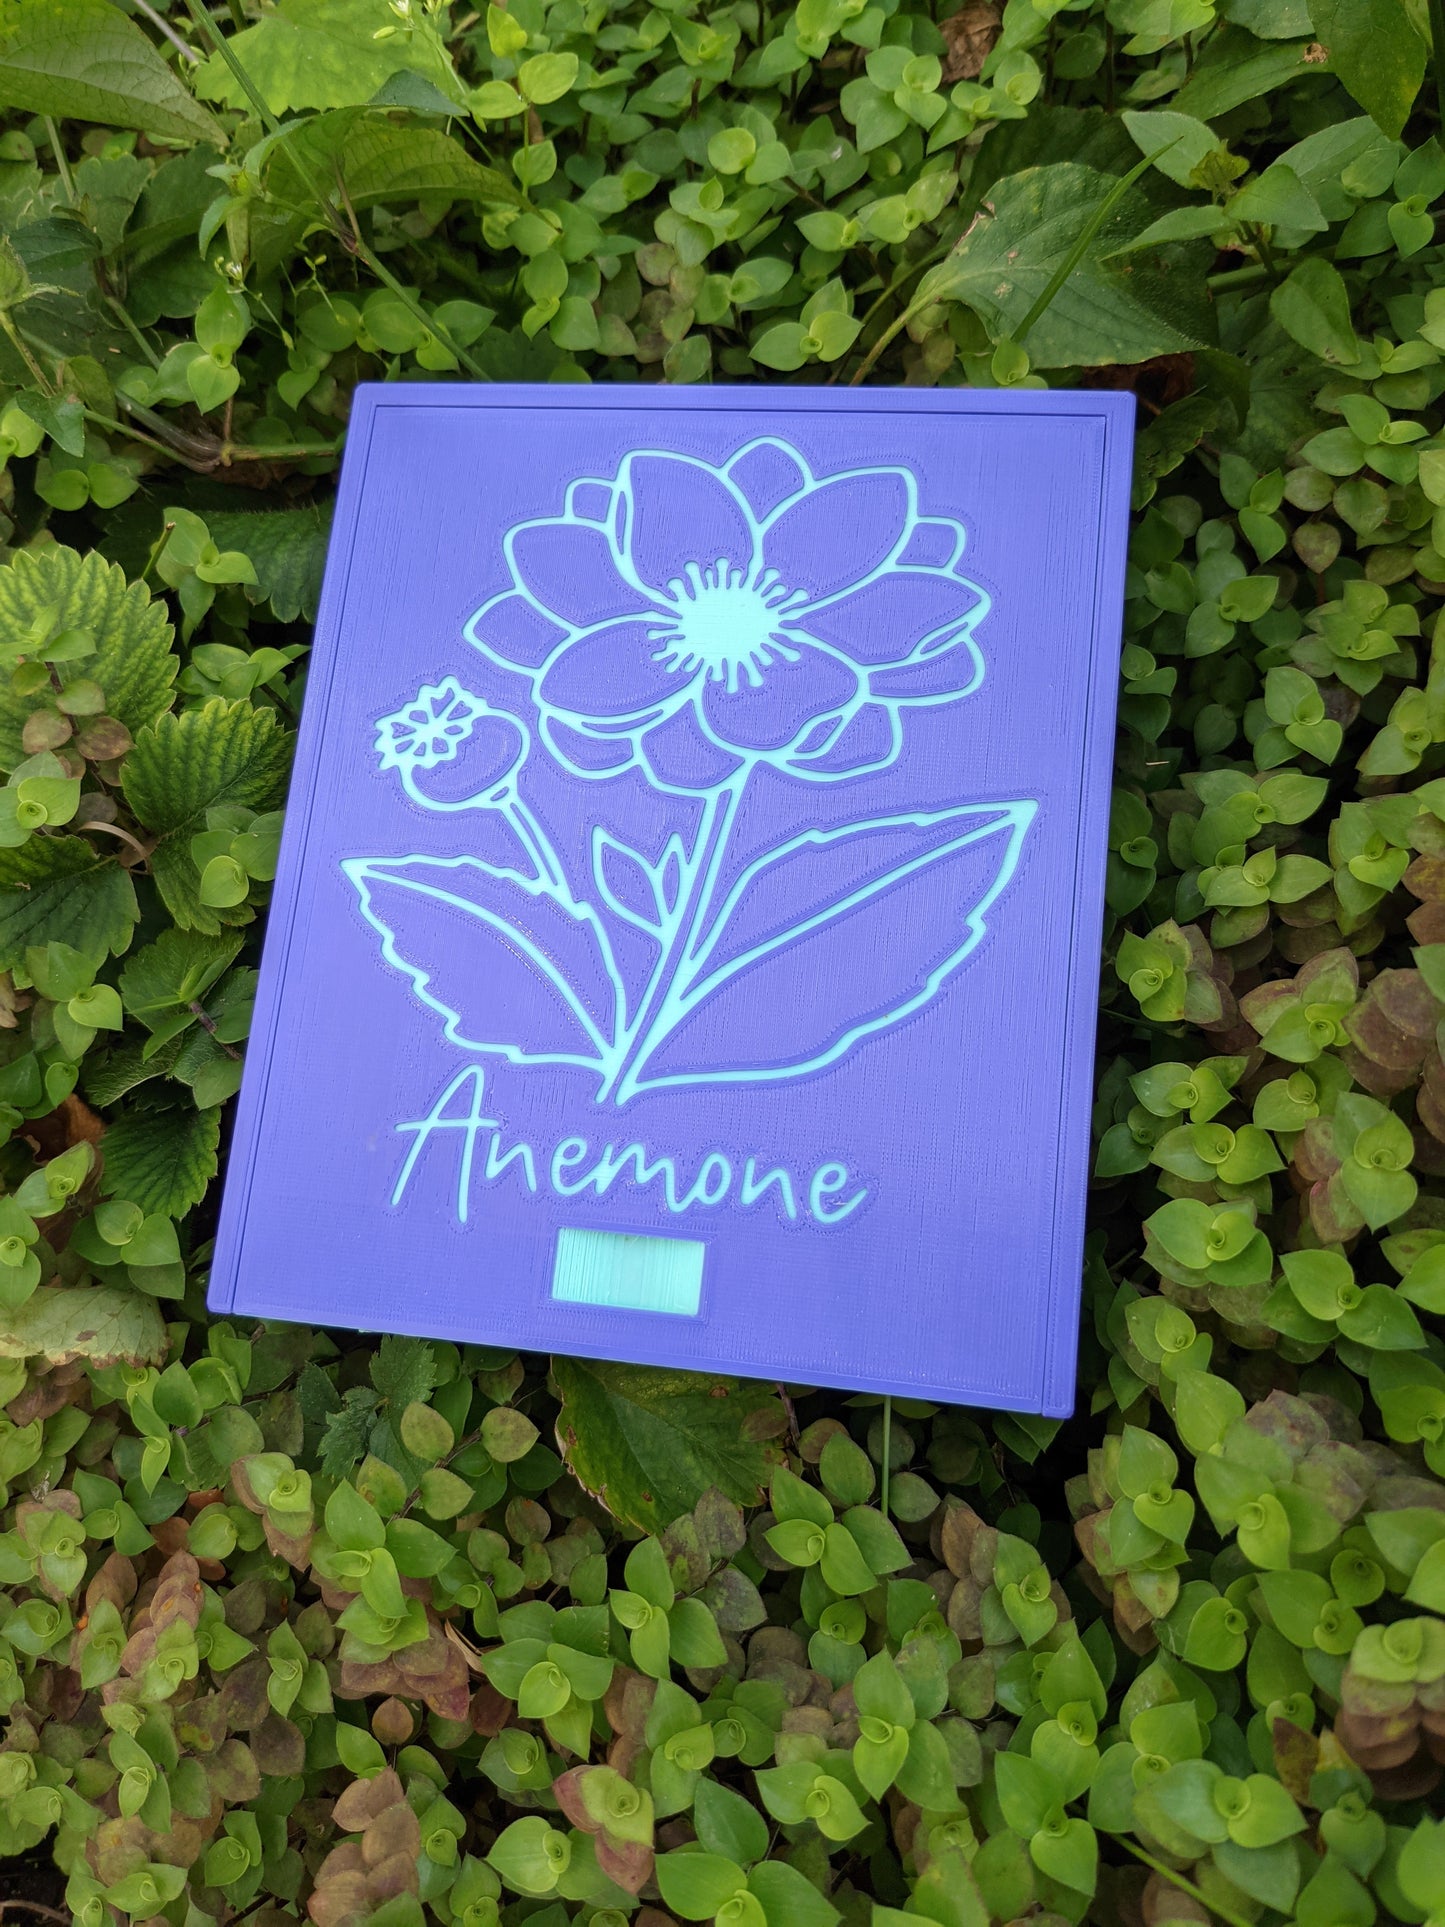 3D printed Notions Box--Anemone